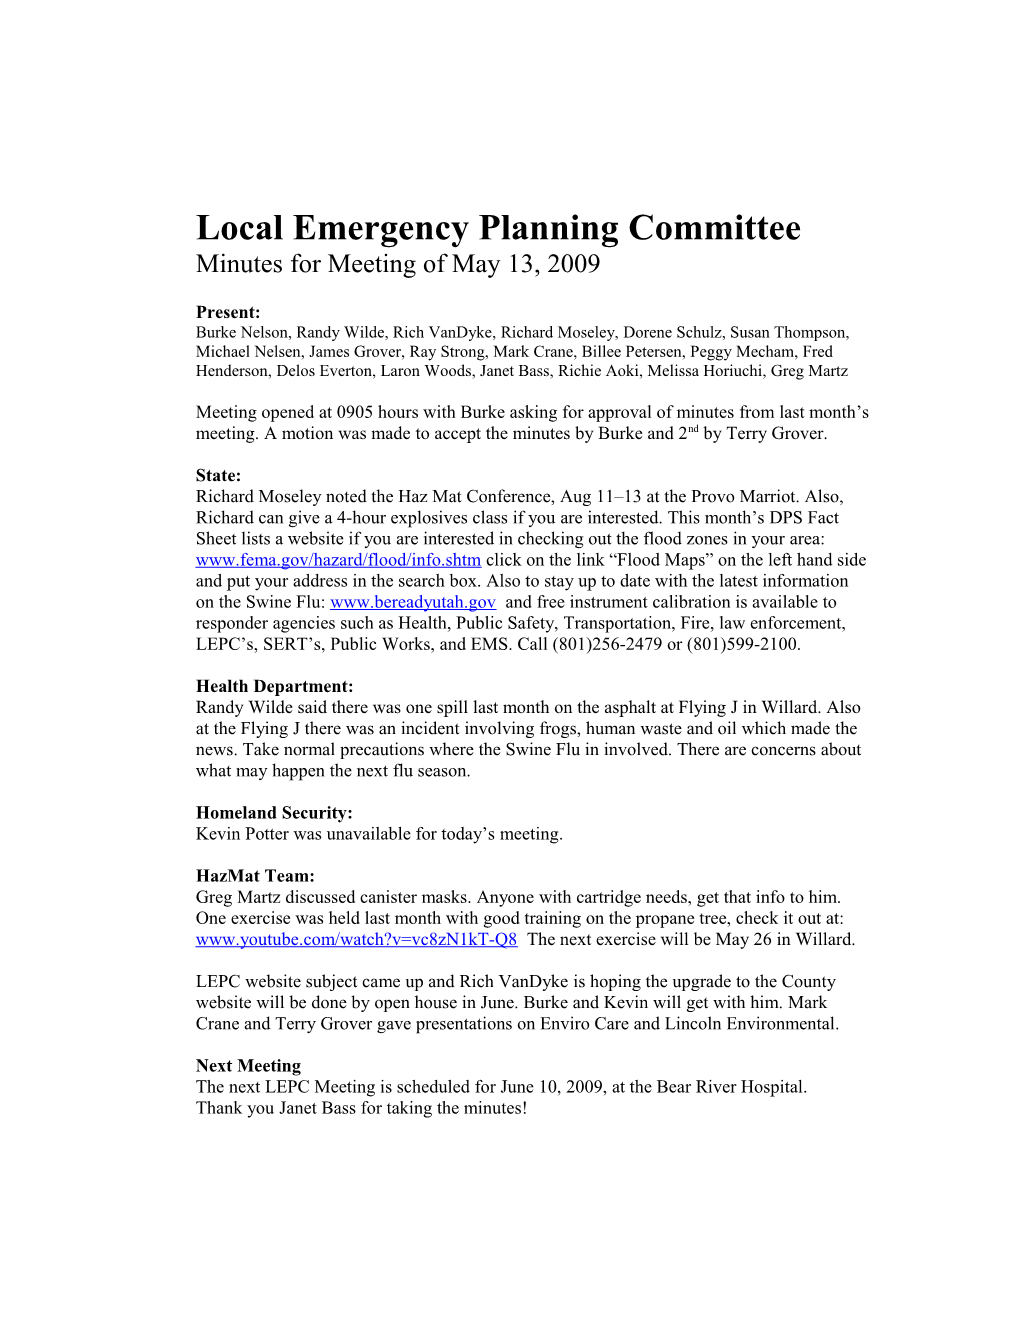 Local Emergency Planning Committee Minutes for Meeting of February 11, 2009